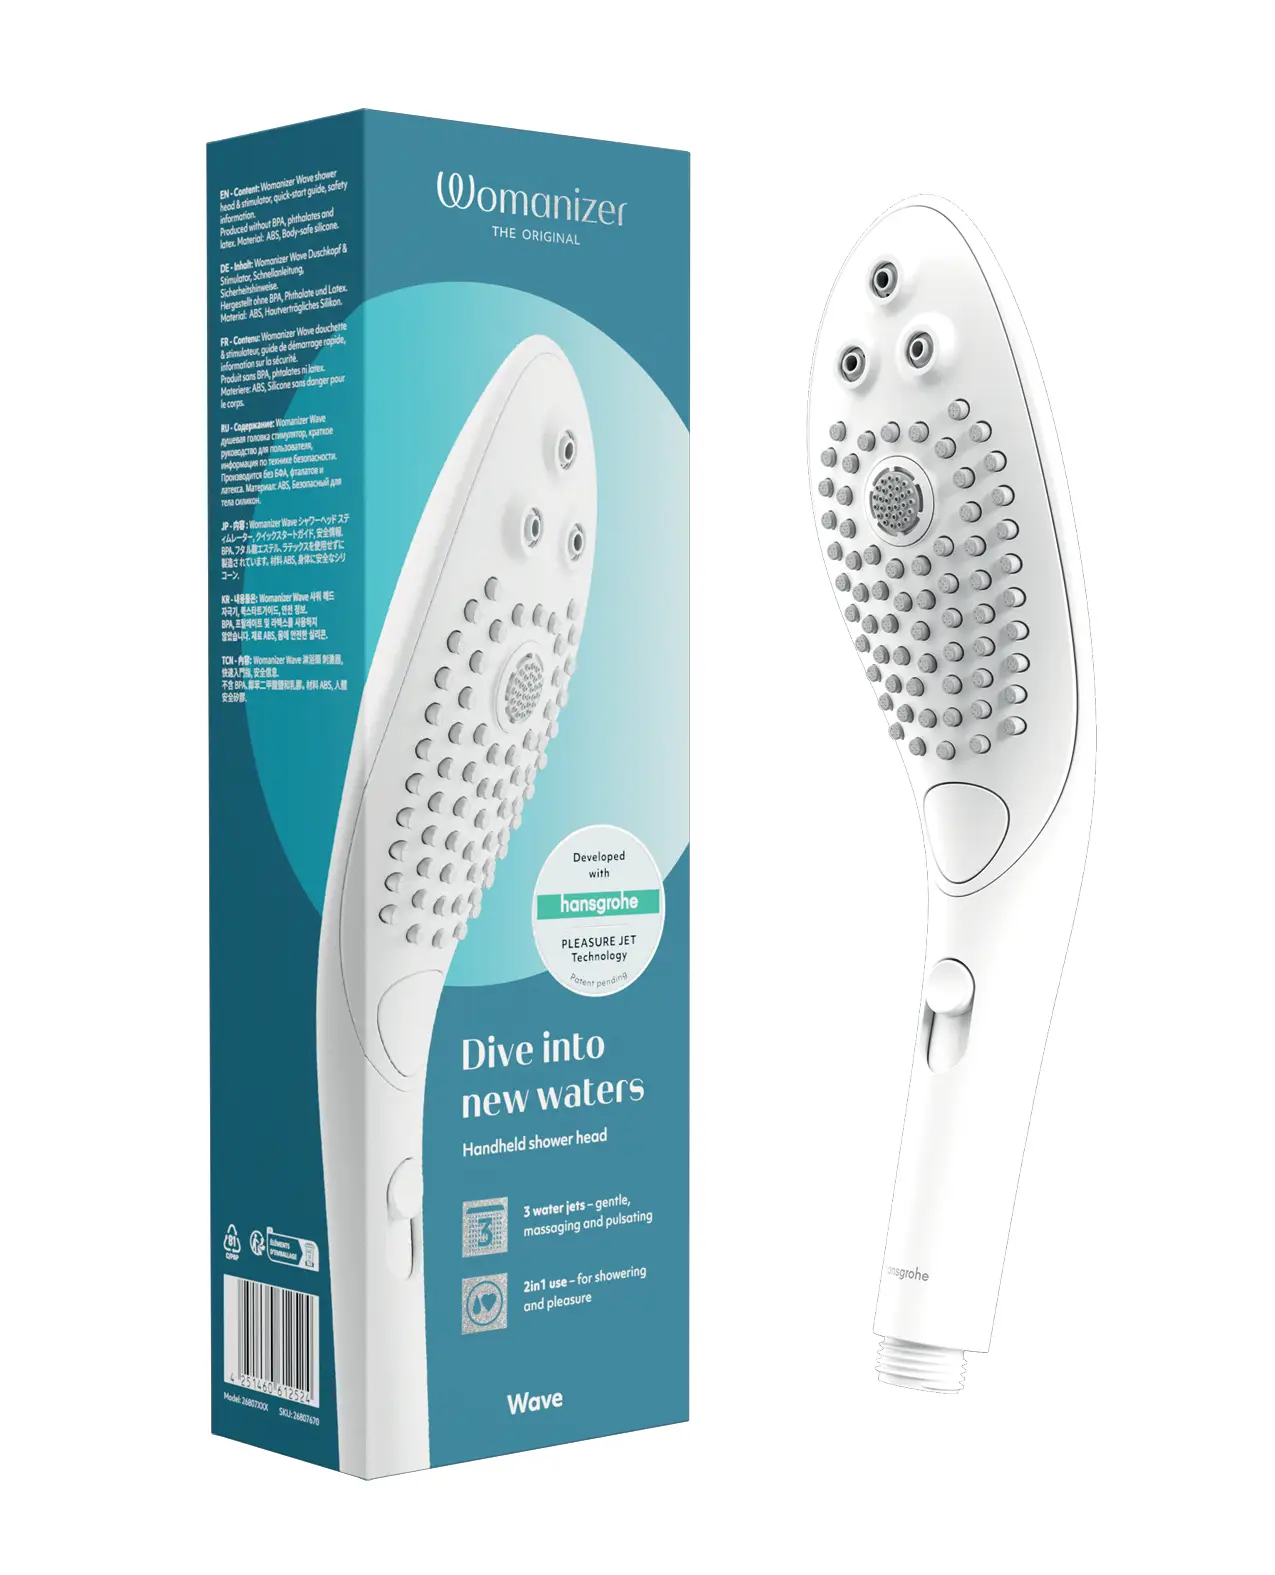 The Womanizer Wave shower head in white on a blue box